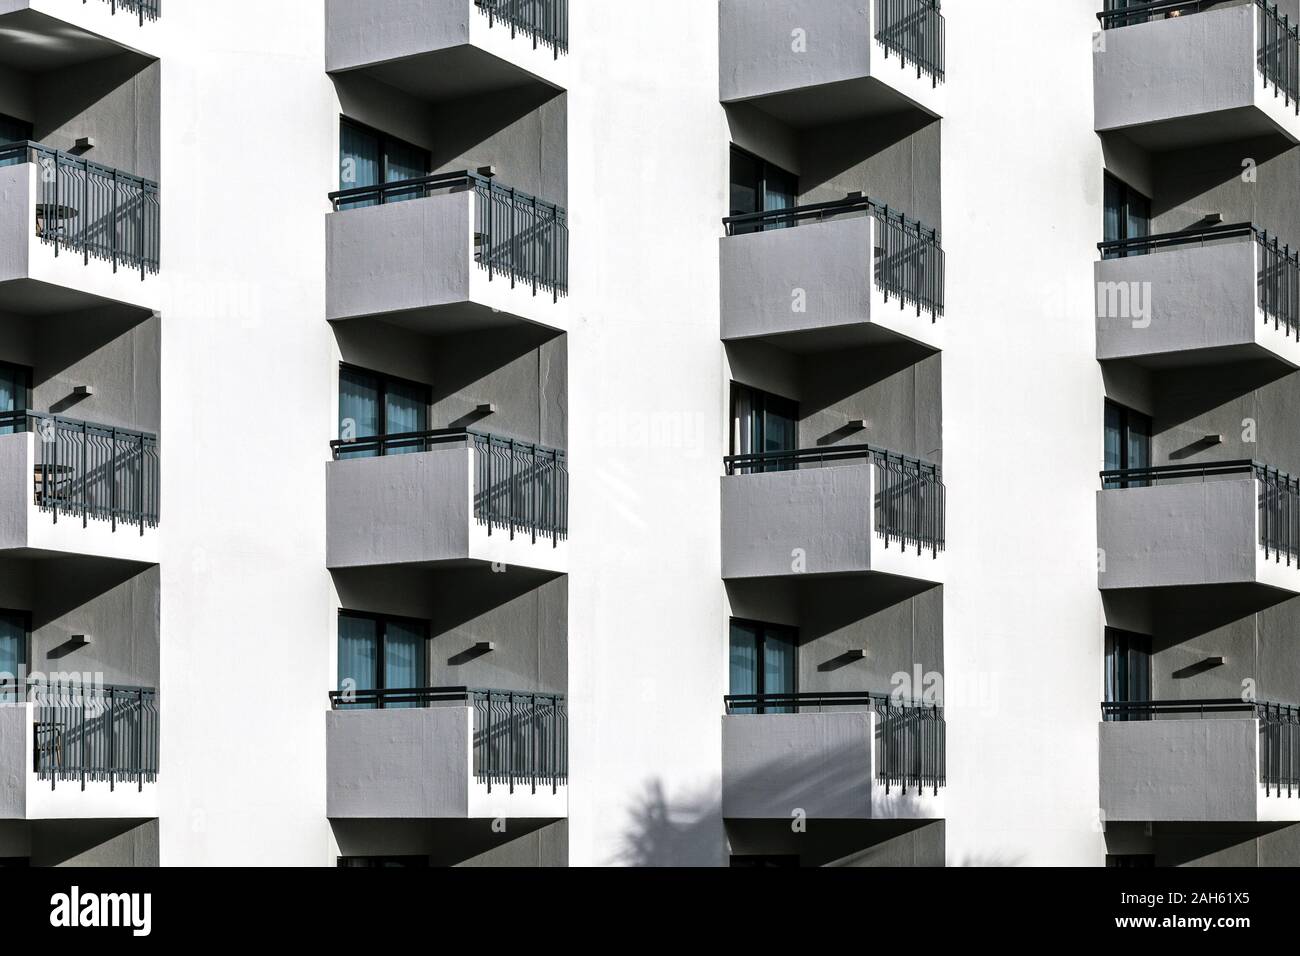 Close-up of balconies at a resort in Madeira, Portugal Stock Photo